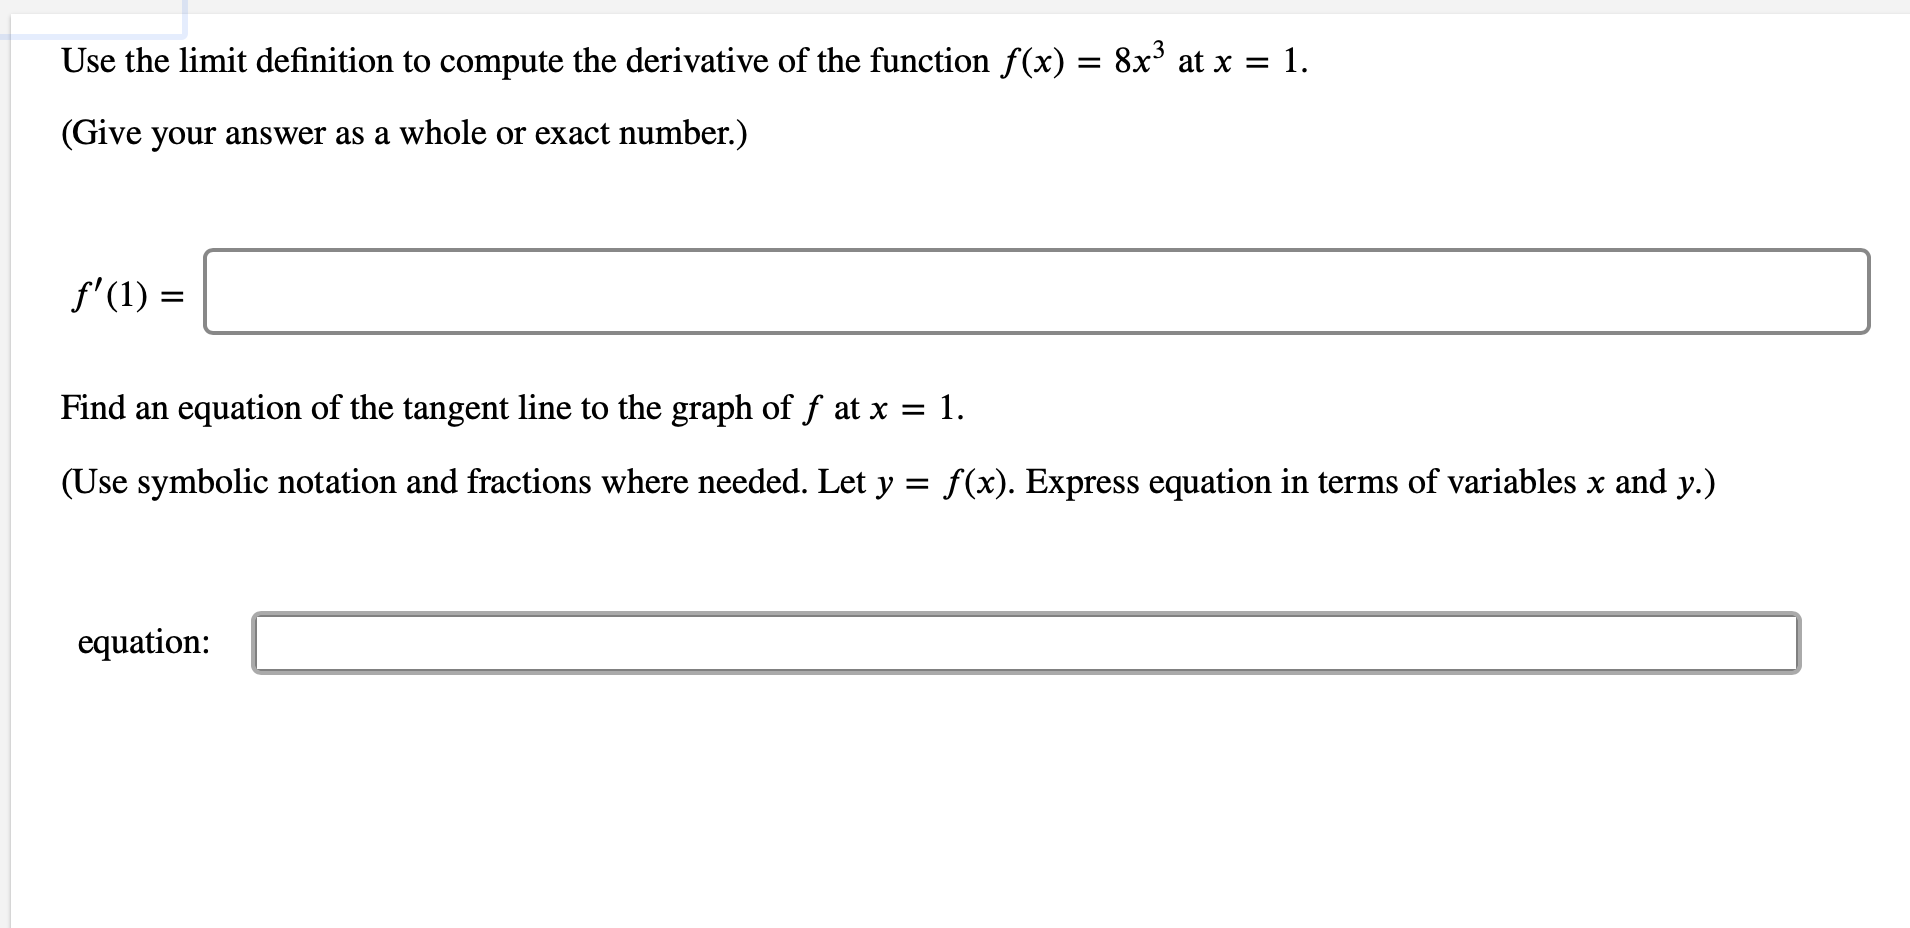 Use the limit definition to compute the derivative of the function f(x) = 8x3 at x = 1
(Give your answer as a whole or exact number.)
f'(1)
Find an equation of the tangent line to the graph of f at x = 1.
(Use symbolic notation and fractions where needed. Let y f(x). Express equation in terms of variables x and y.)
equation:
